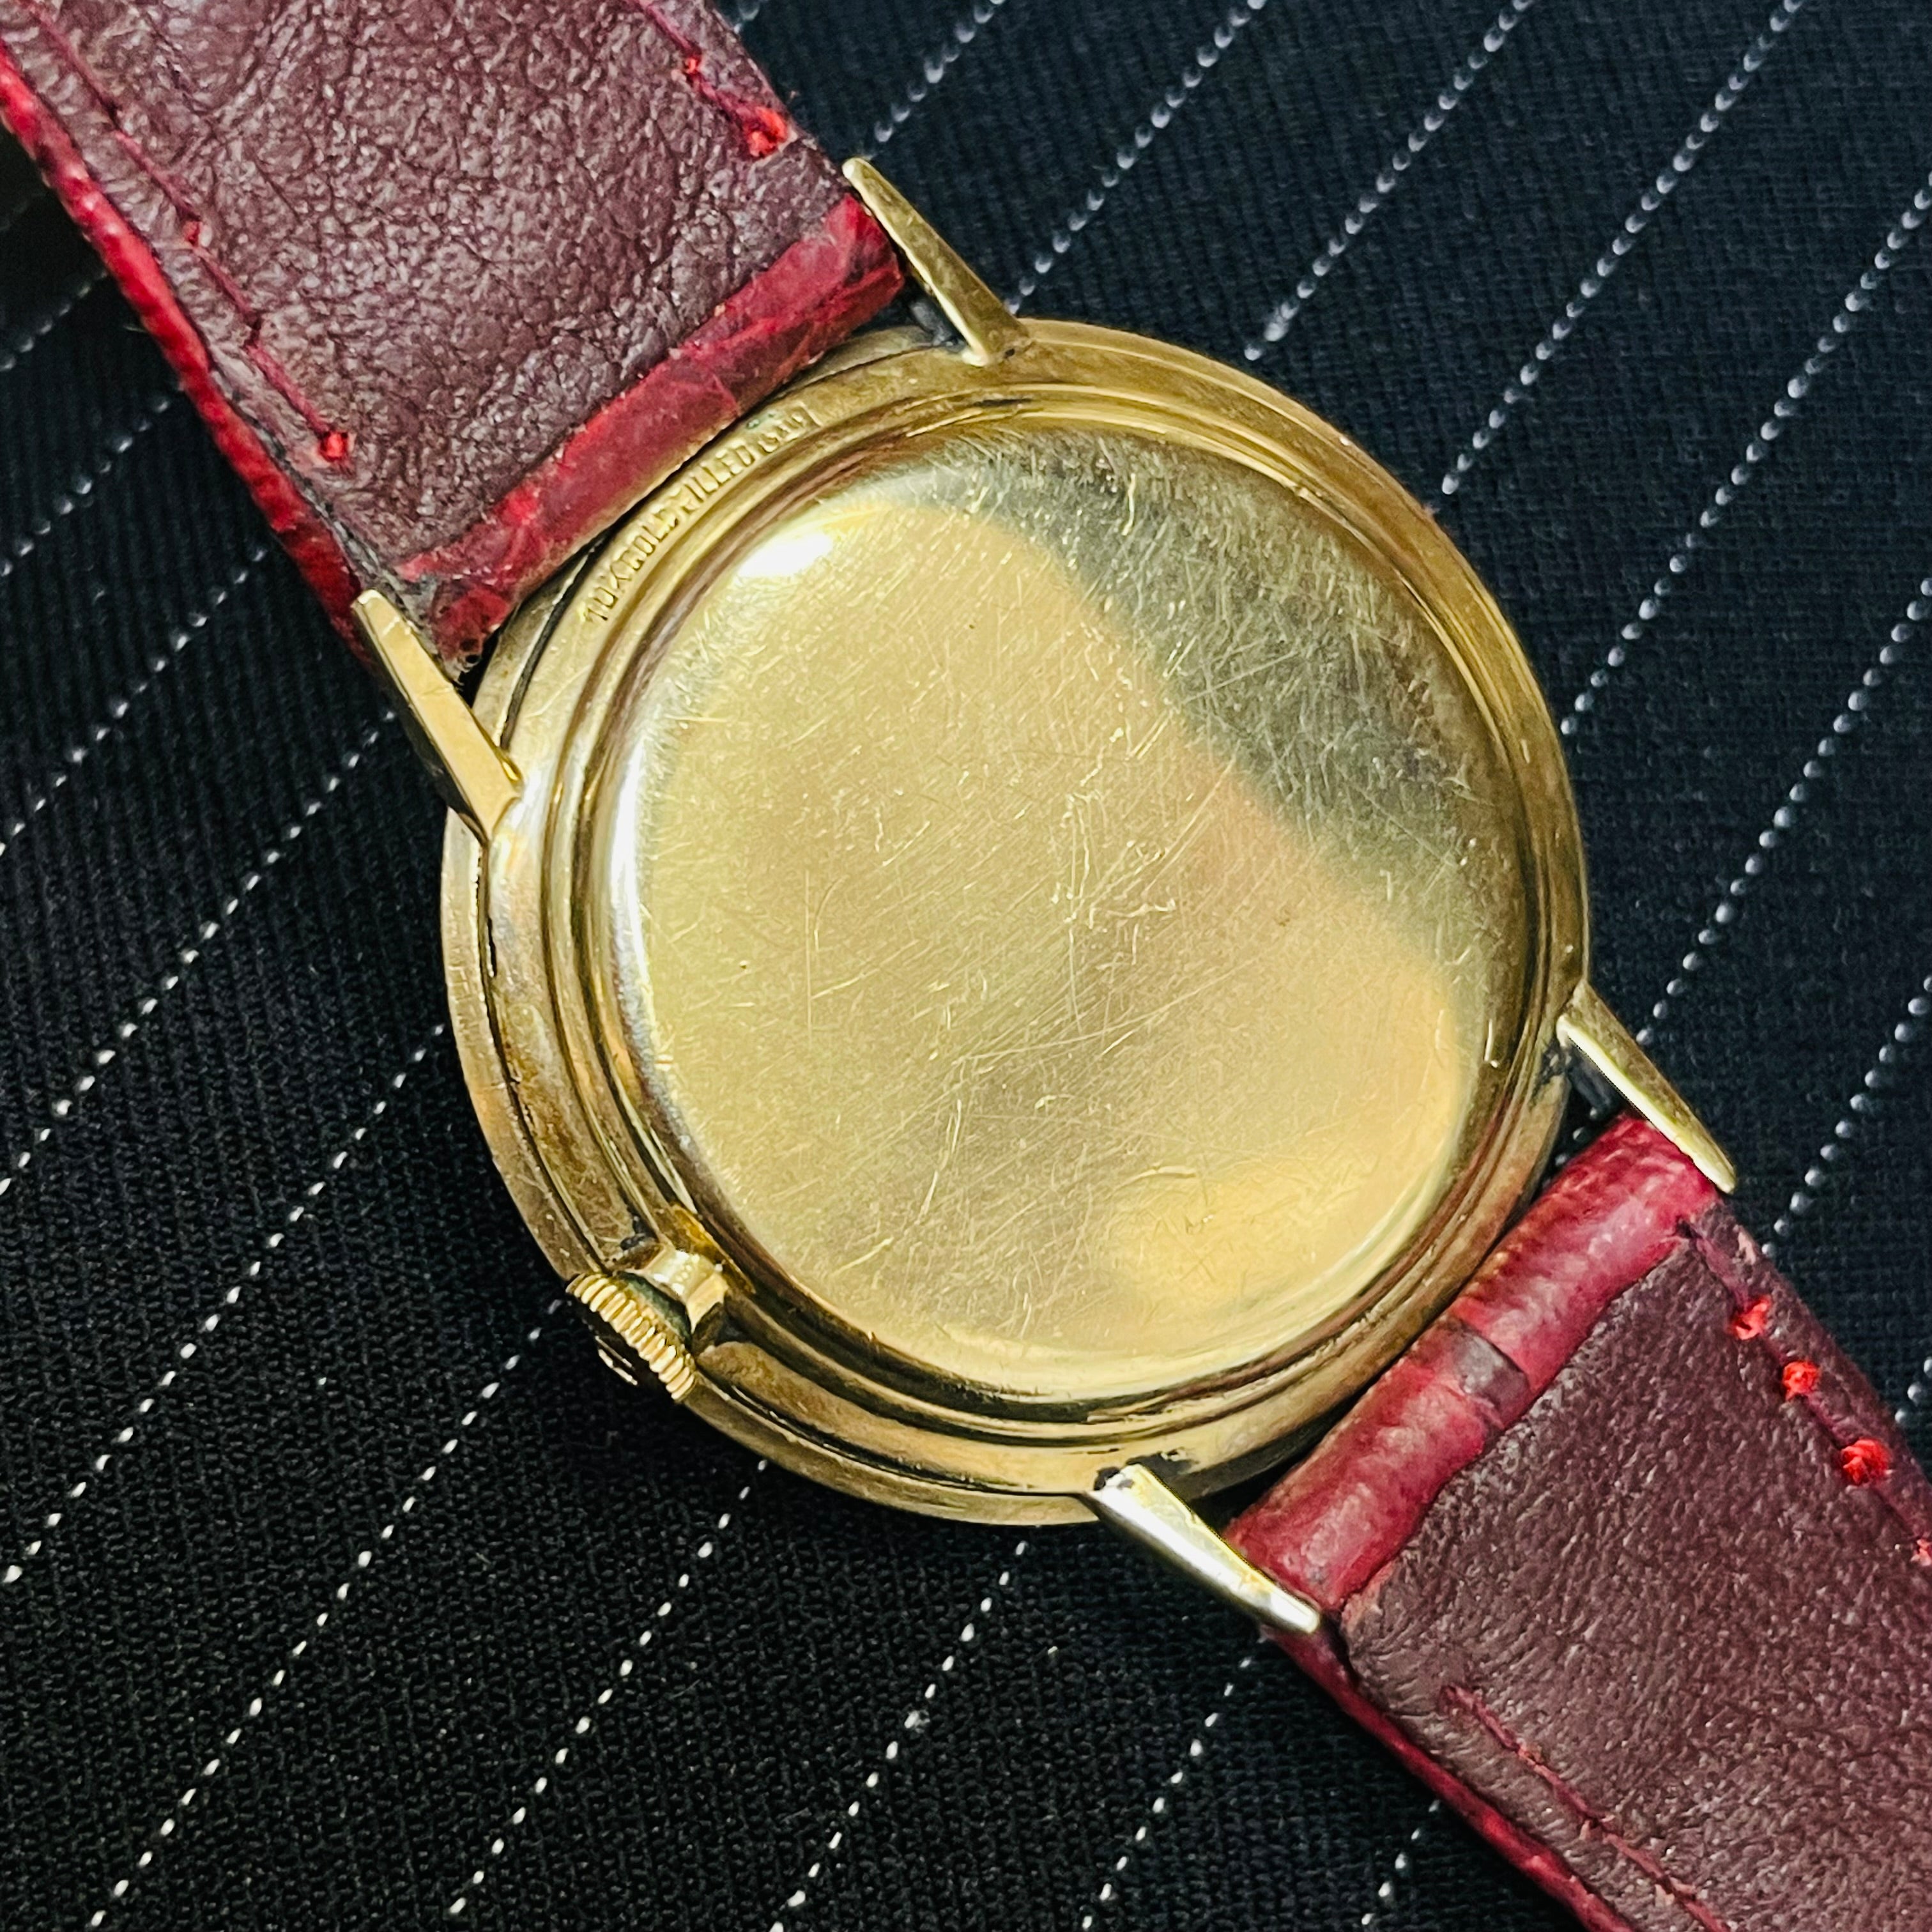 36mm Longines Gold Filled Wristwatch